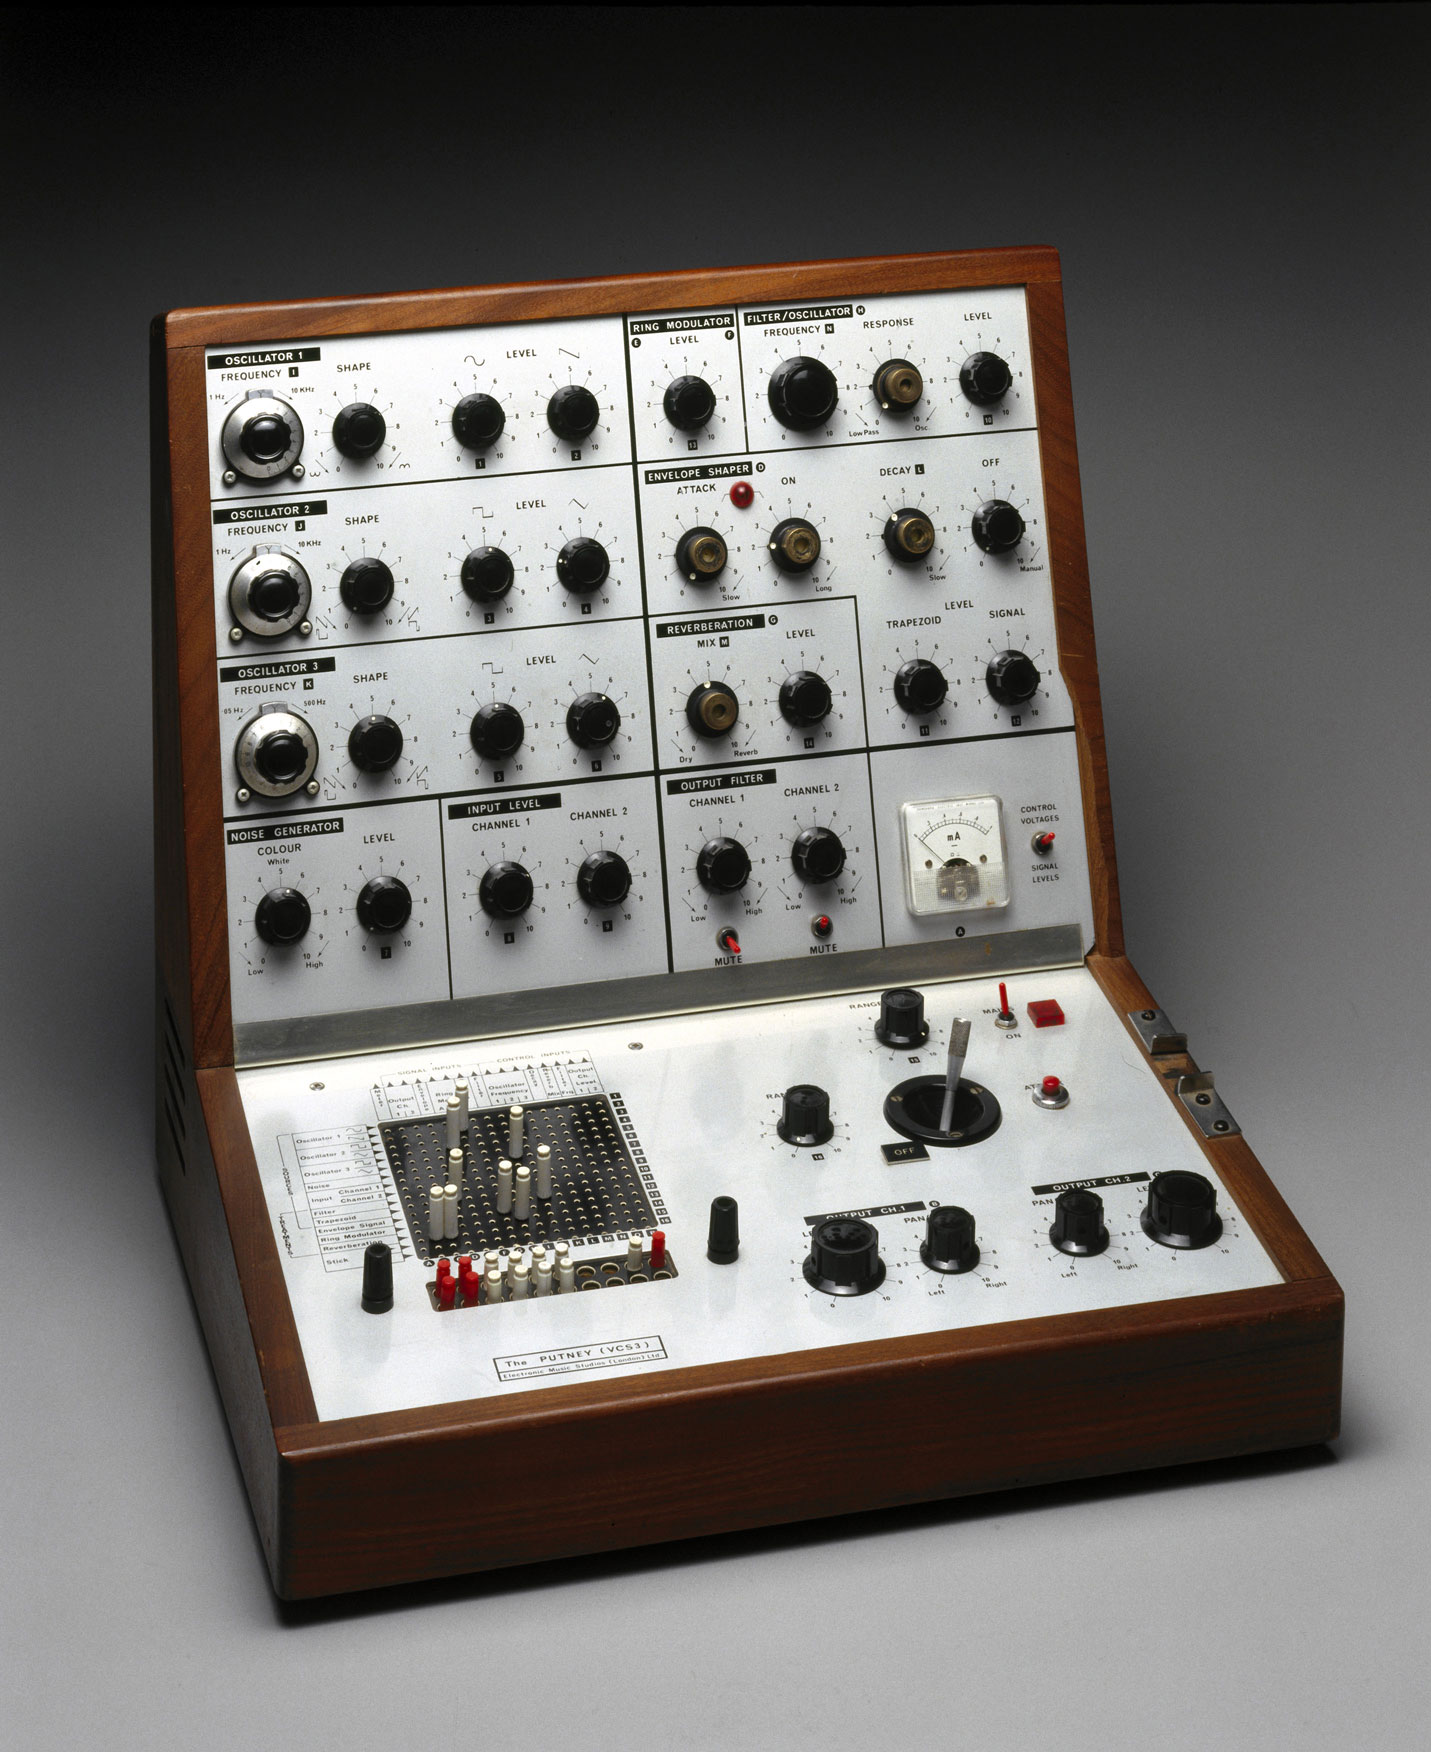 An EMS Synthesizers from the Science Museum collection. Synthesizers like this were used by Kraftwerk .